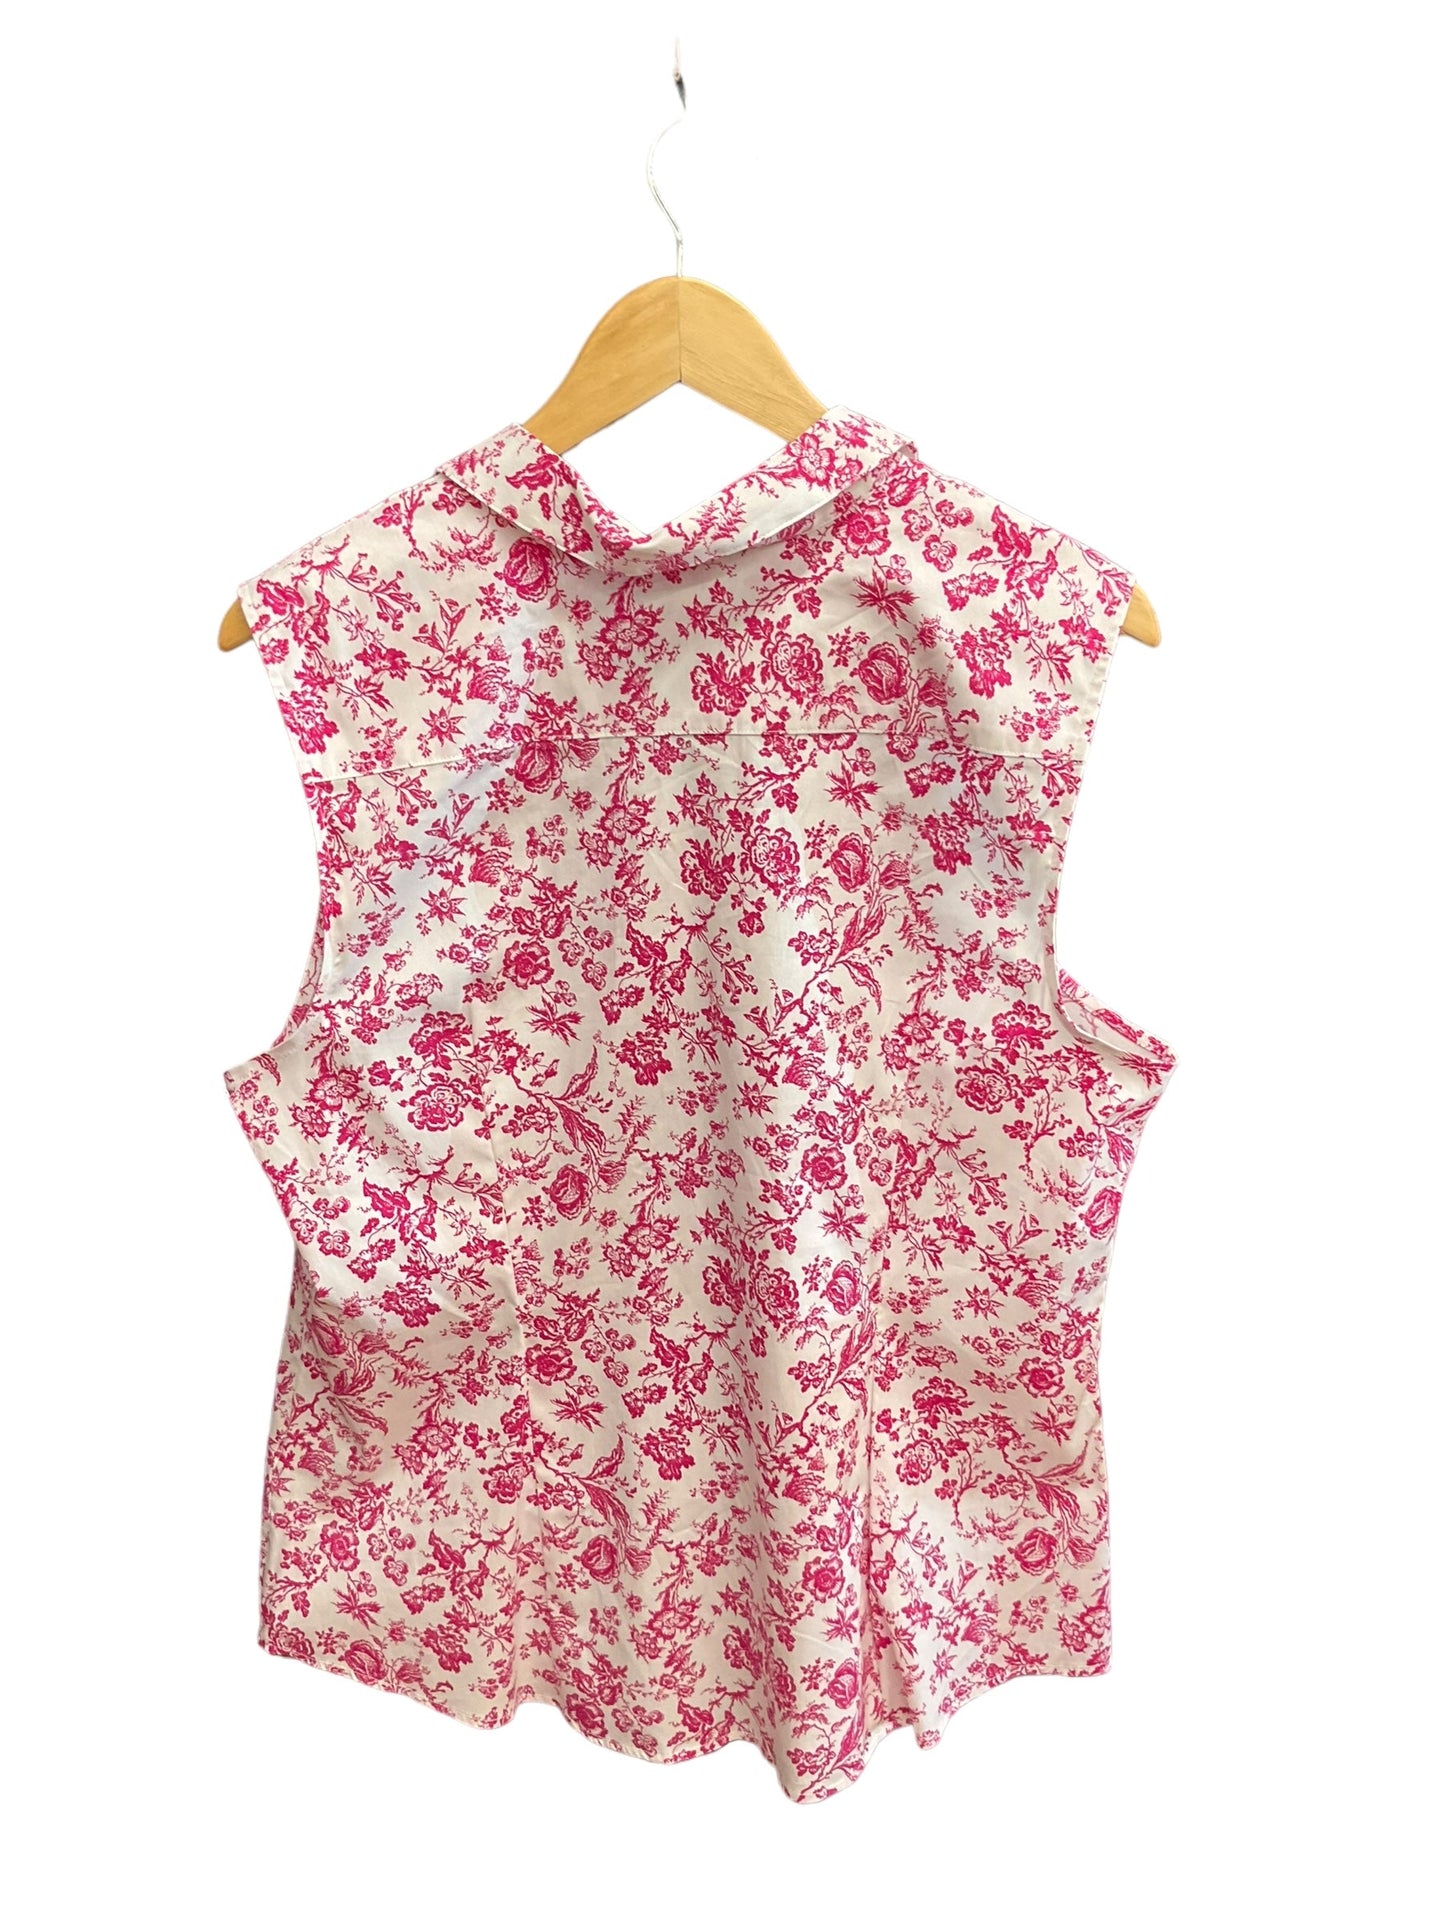 Floral Print Blouse Sleeveless Charter Club, Size 1x